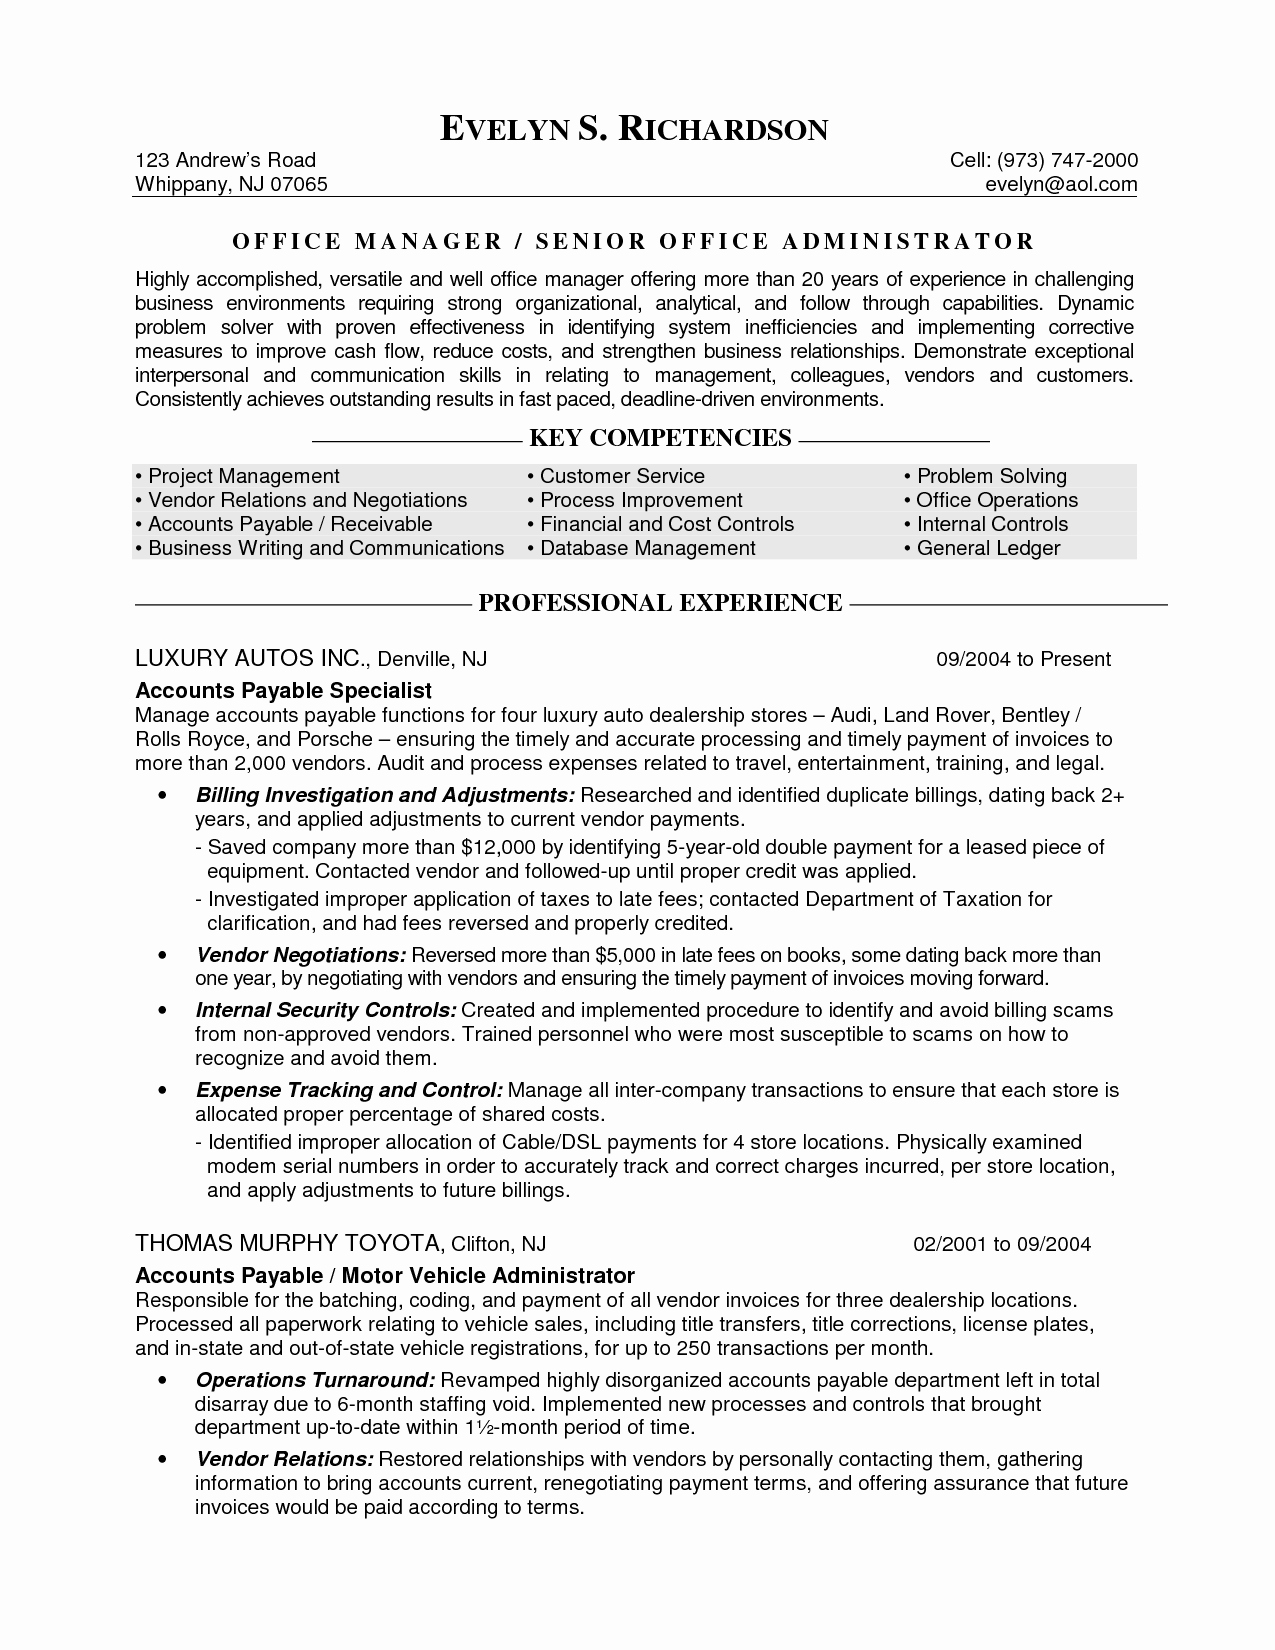 Sample Resume Templates for Fice Manager Medical Office